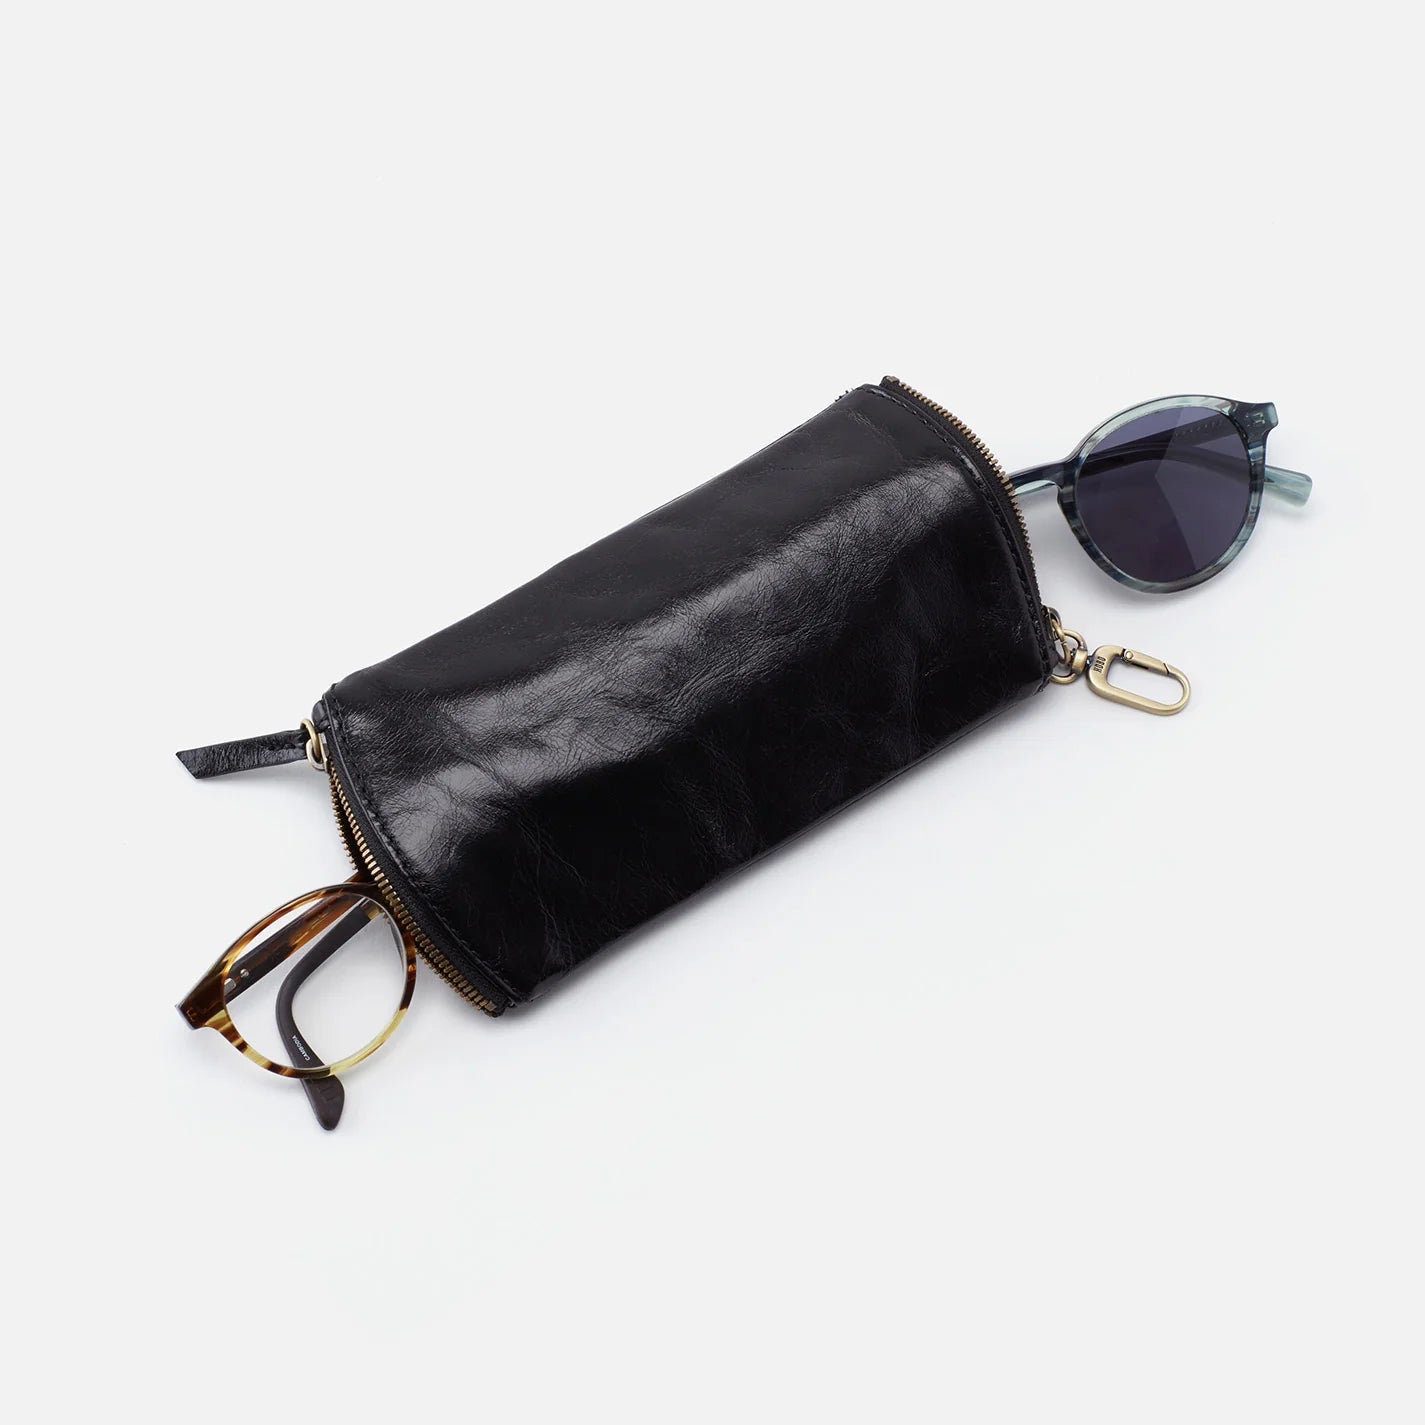 The Spark in vintage black is a double eyeglass case that has an easy-to-use clip for attaching to your bag and two compartments for your favorite glasses. Check it out at the Painted Cottage in Edgewater, MD